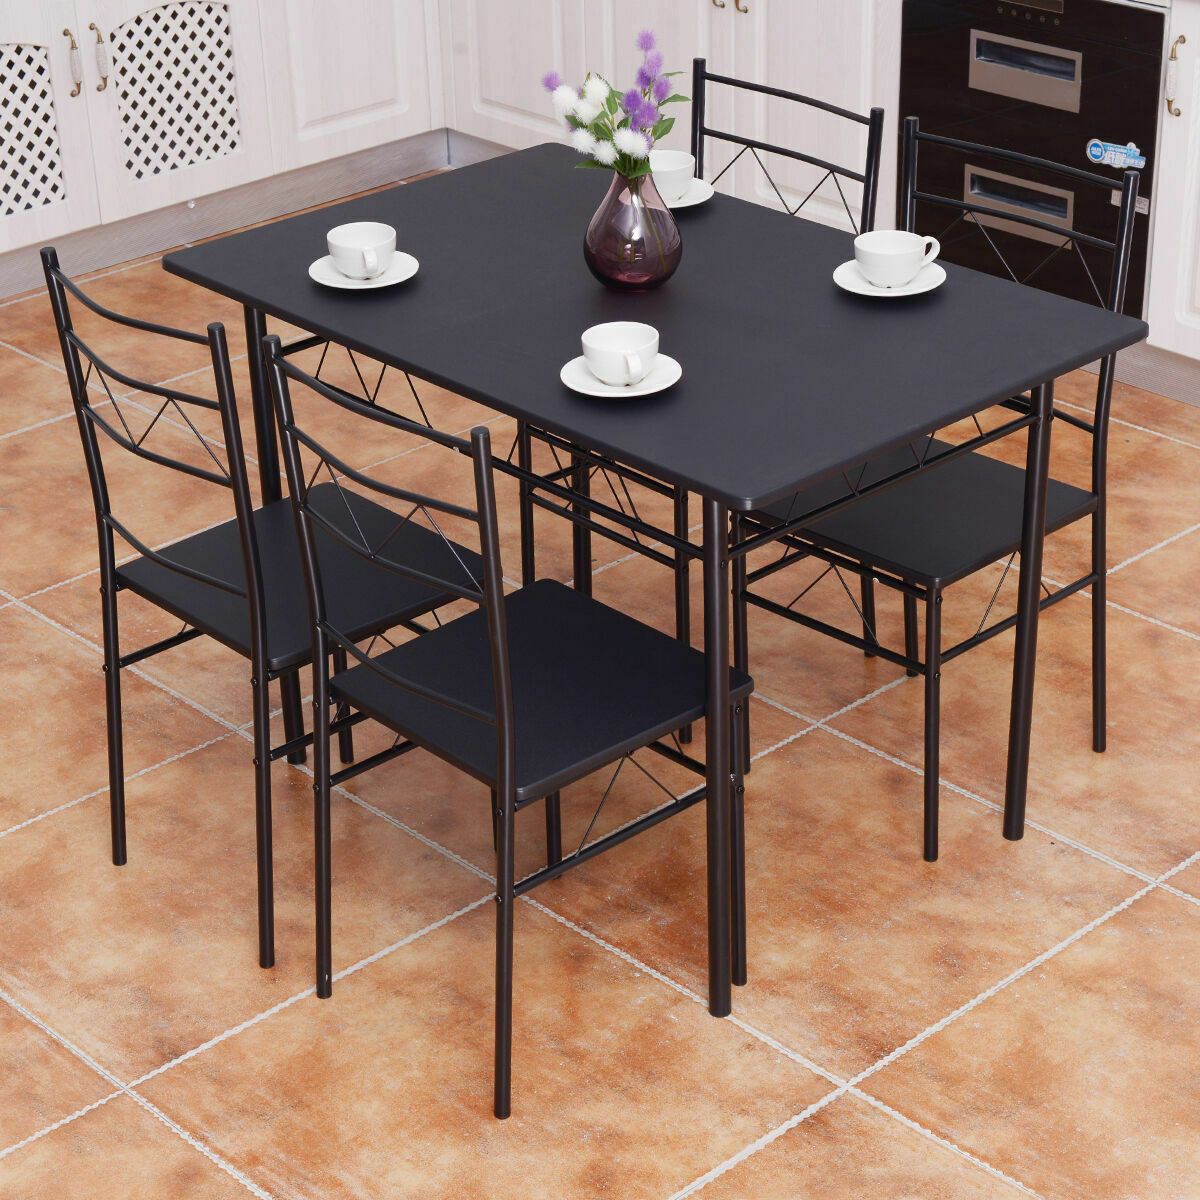 5 dining set 4 chairs and table new box Free Delivery